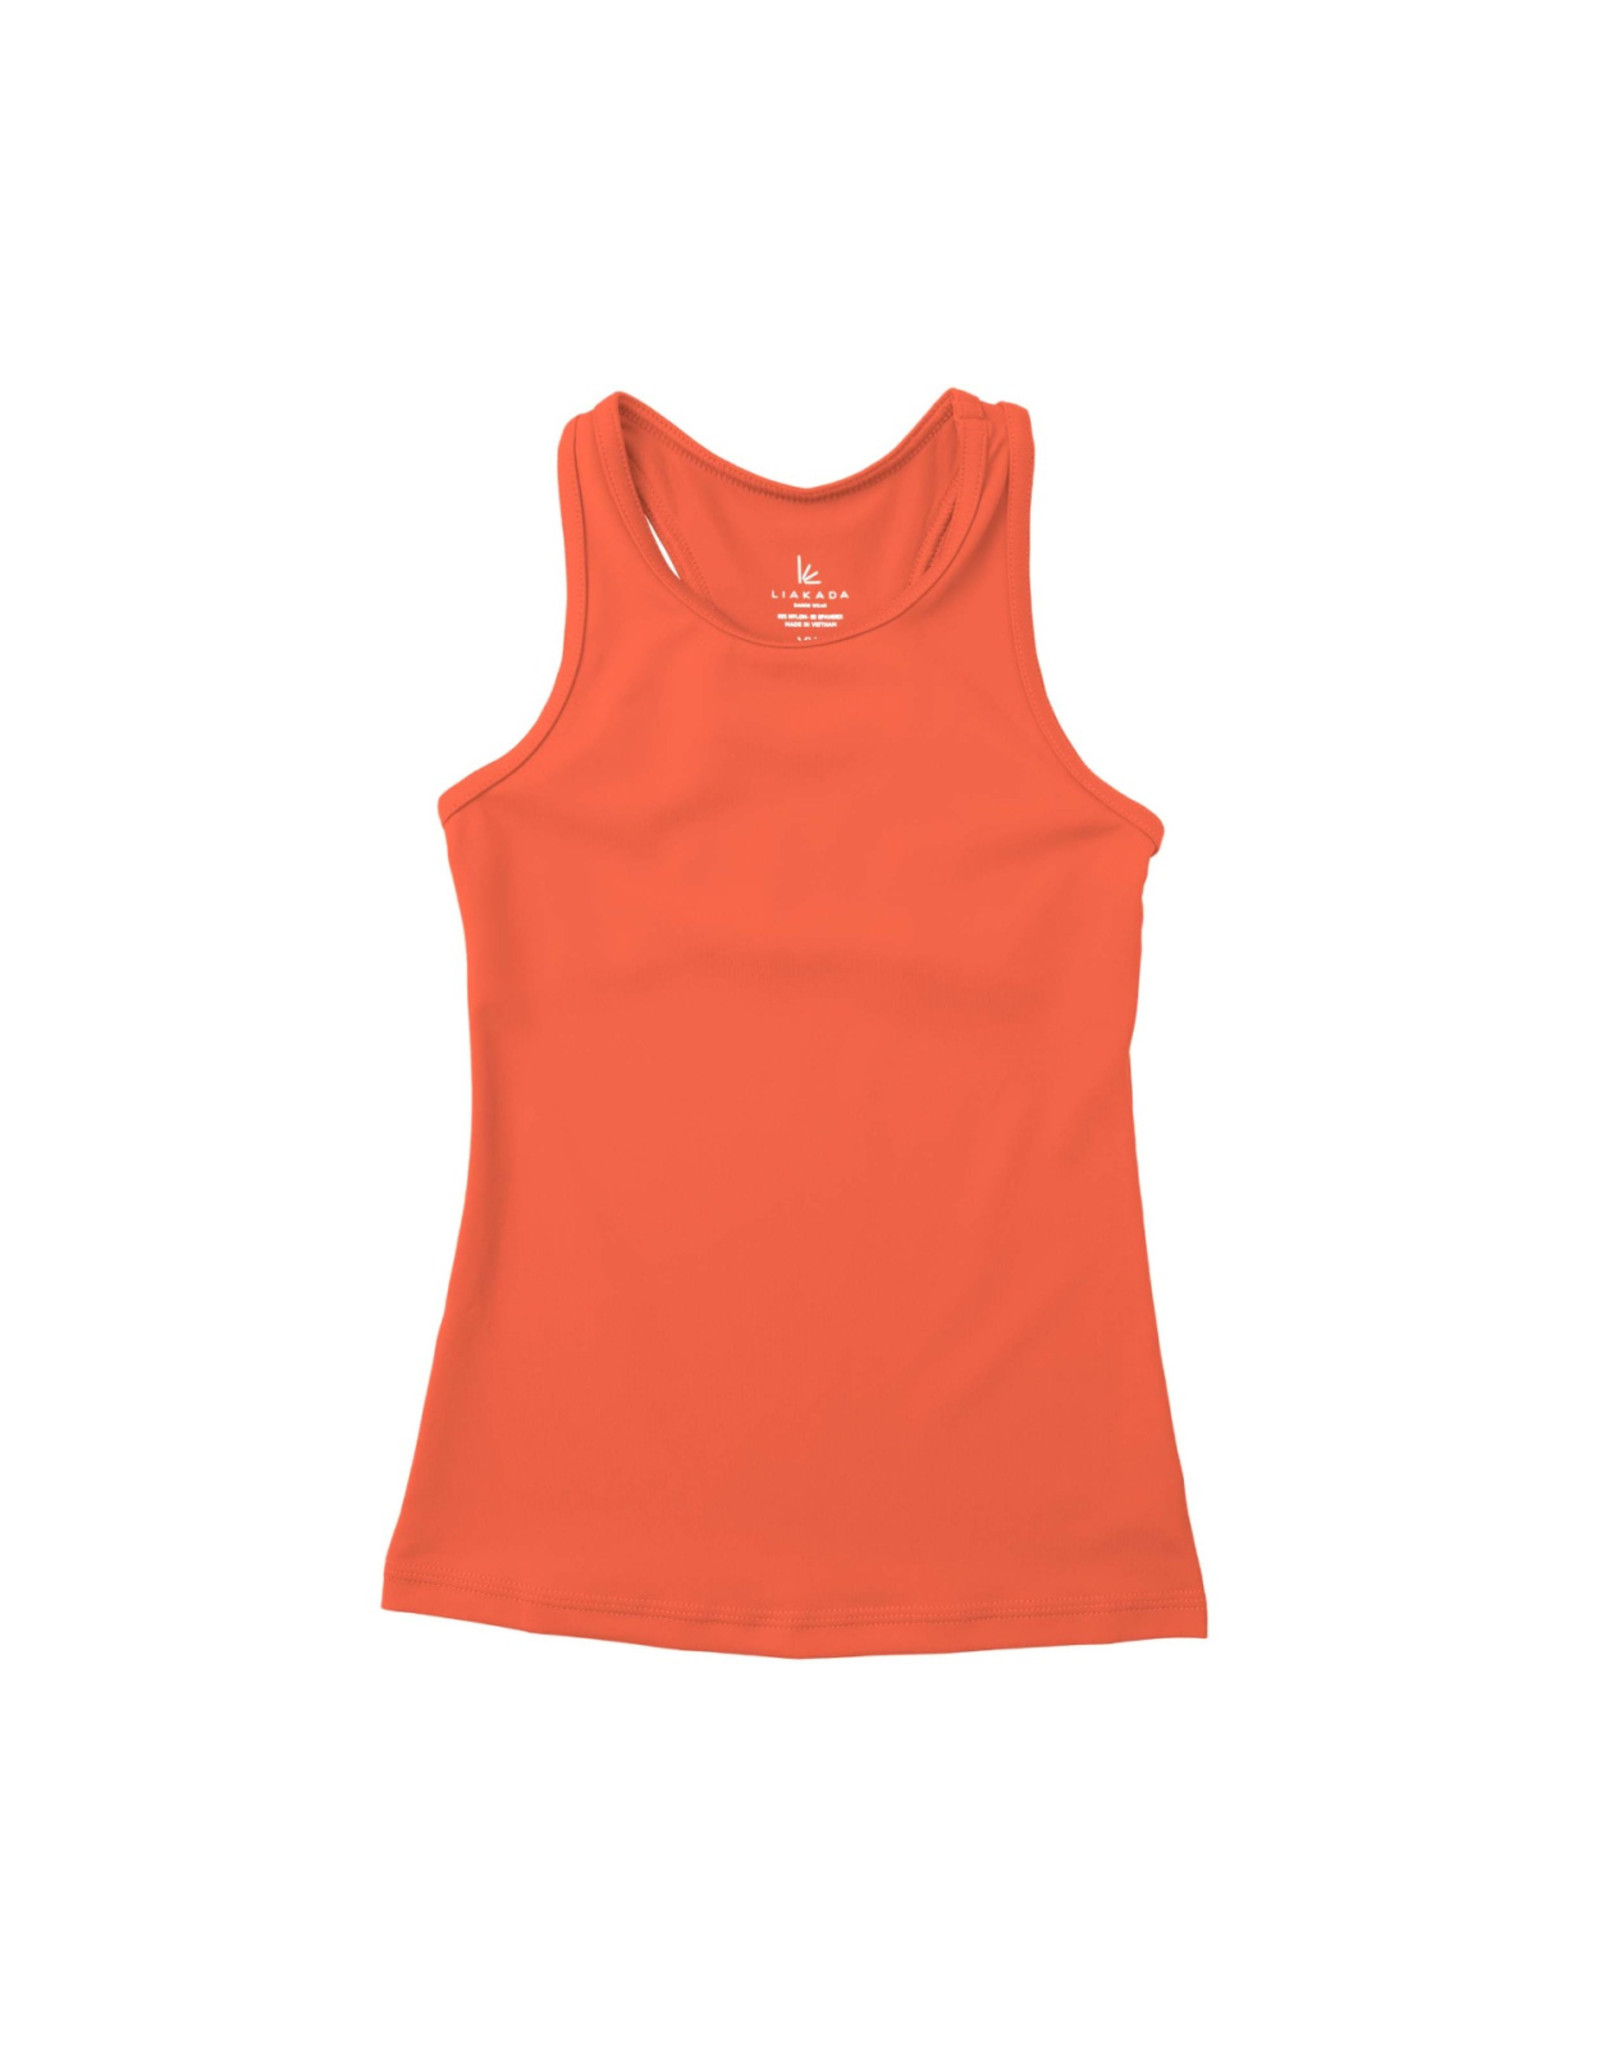 Youth Basic Tank Top